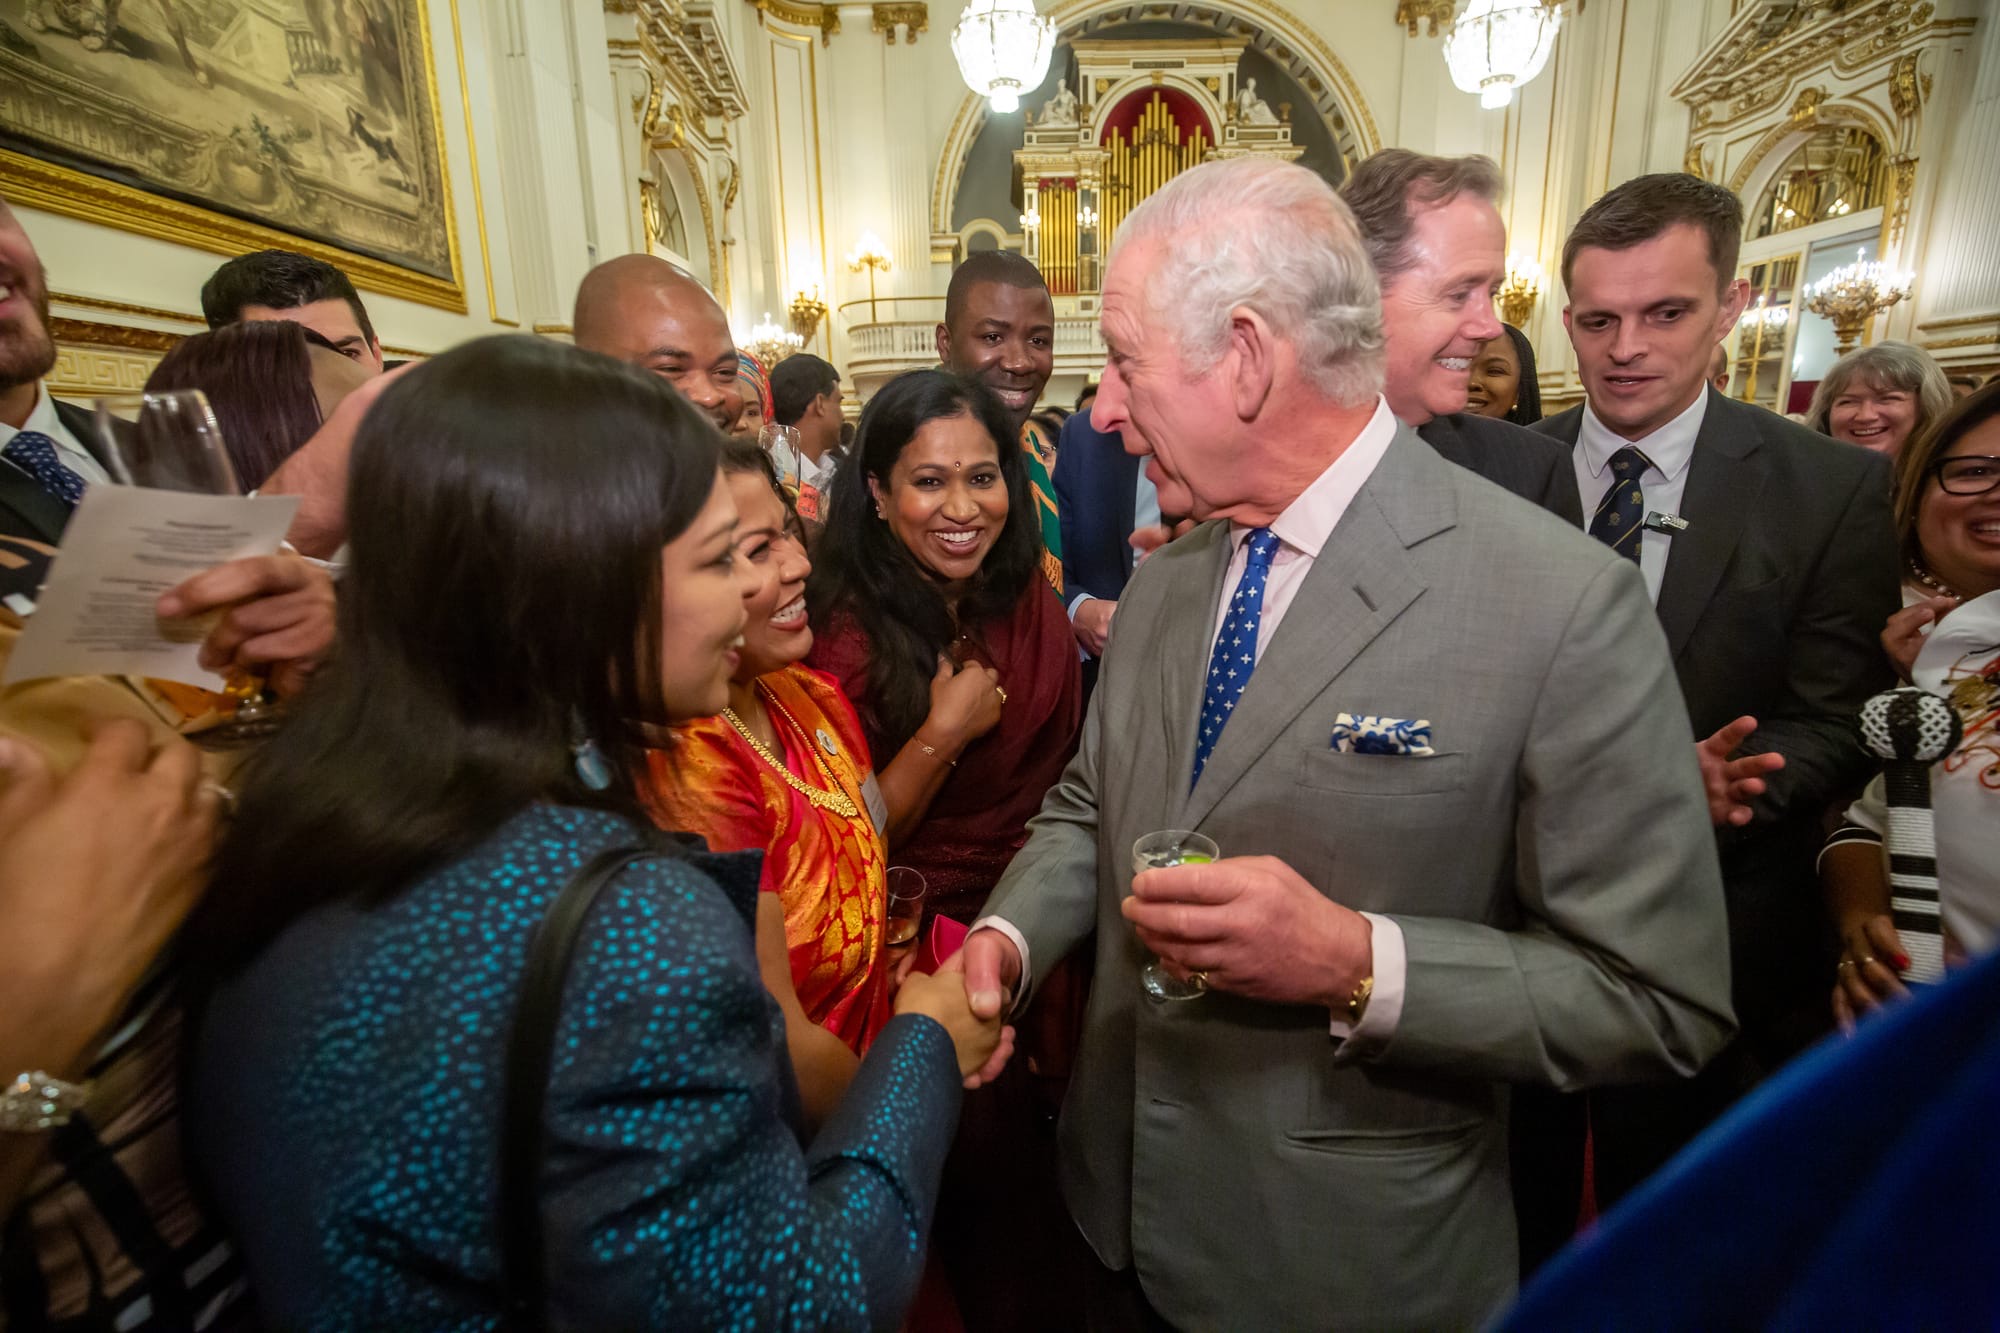 Swapna shaking hands with the King surrounded by other excited visitors to the Palace